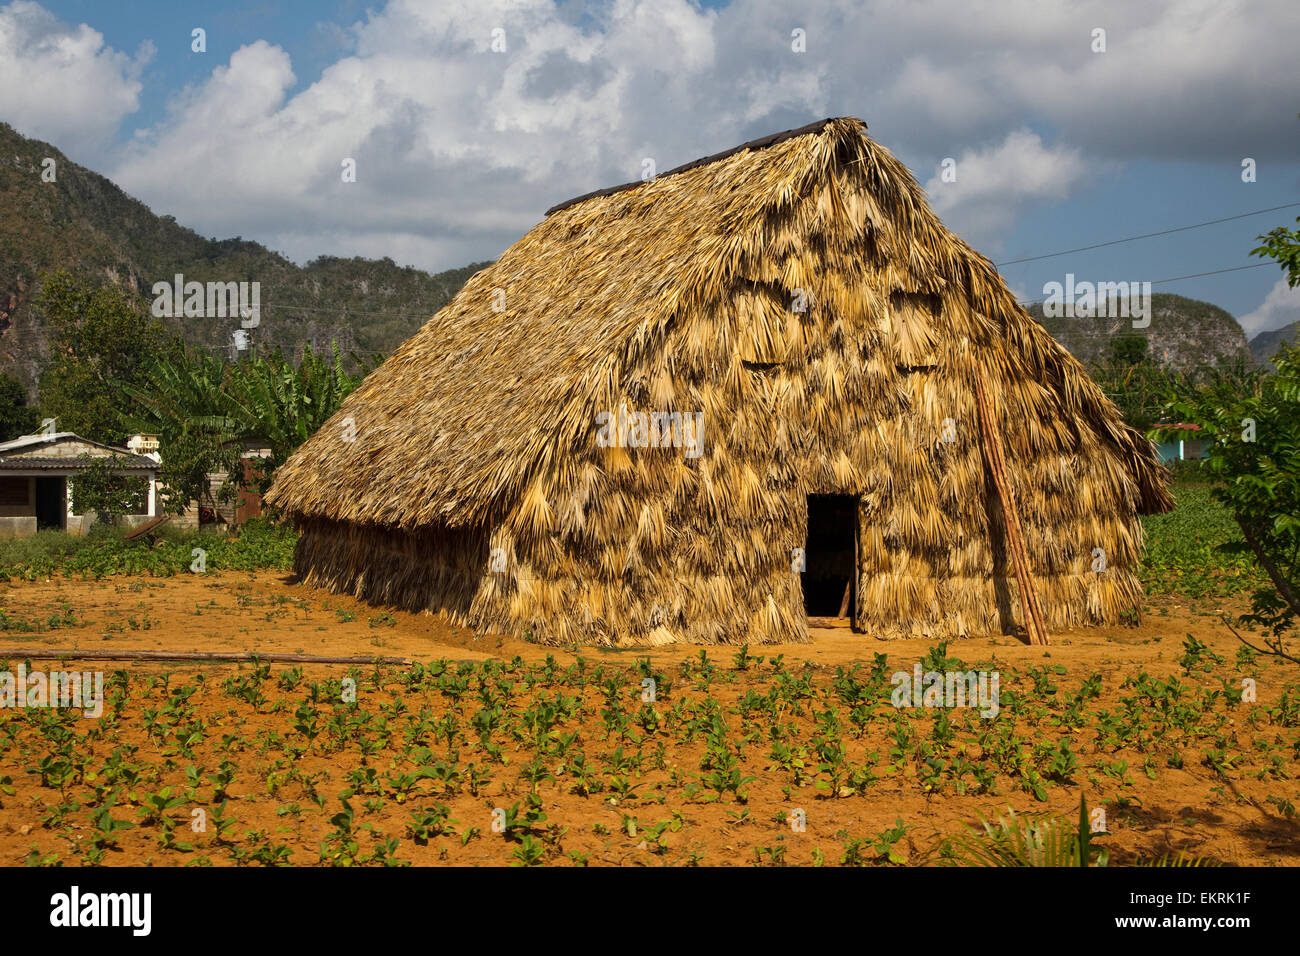 A tobacco house in agricultural land in Vinales, Cuba with crops and tobacco plantations Stock Photo